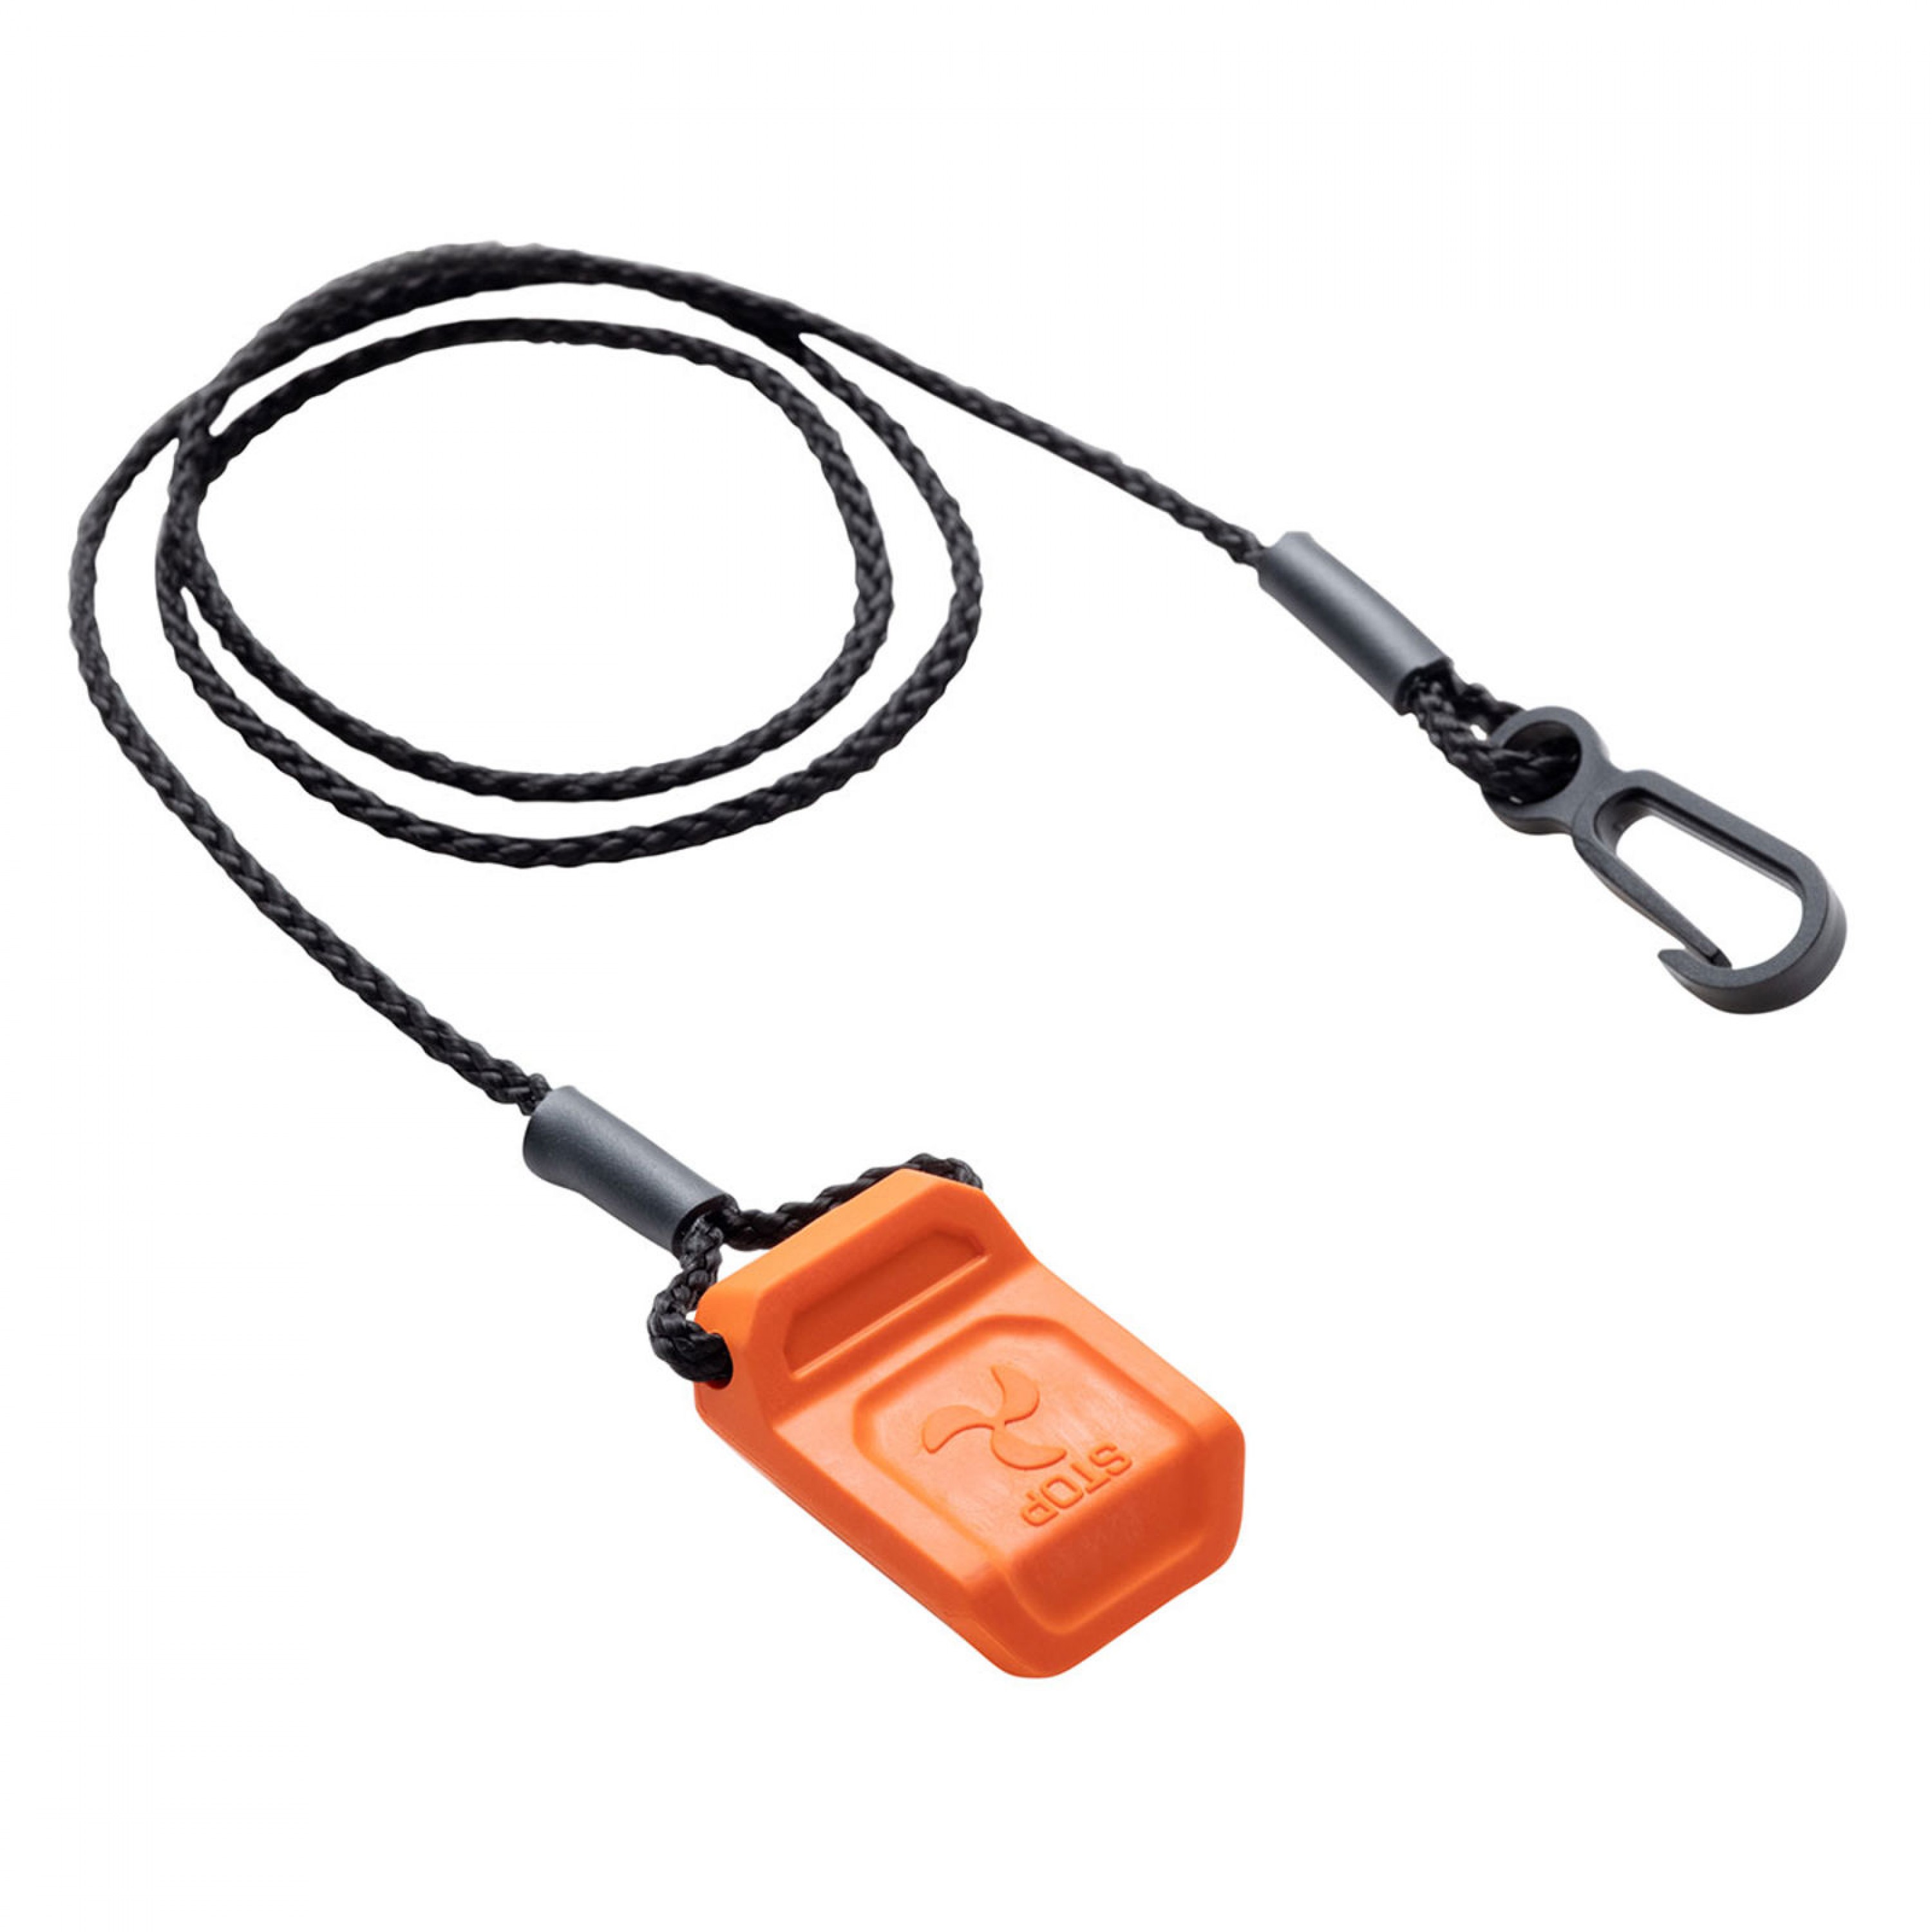 MAGNETIC KILL SWITCH FOR TORQLINK THROTTLE AND TORQLINK TILLER